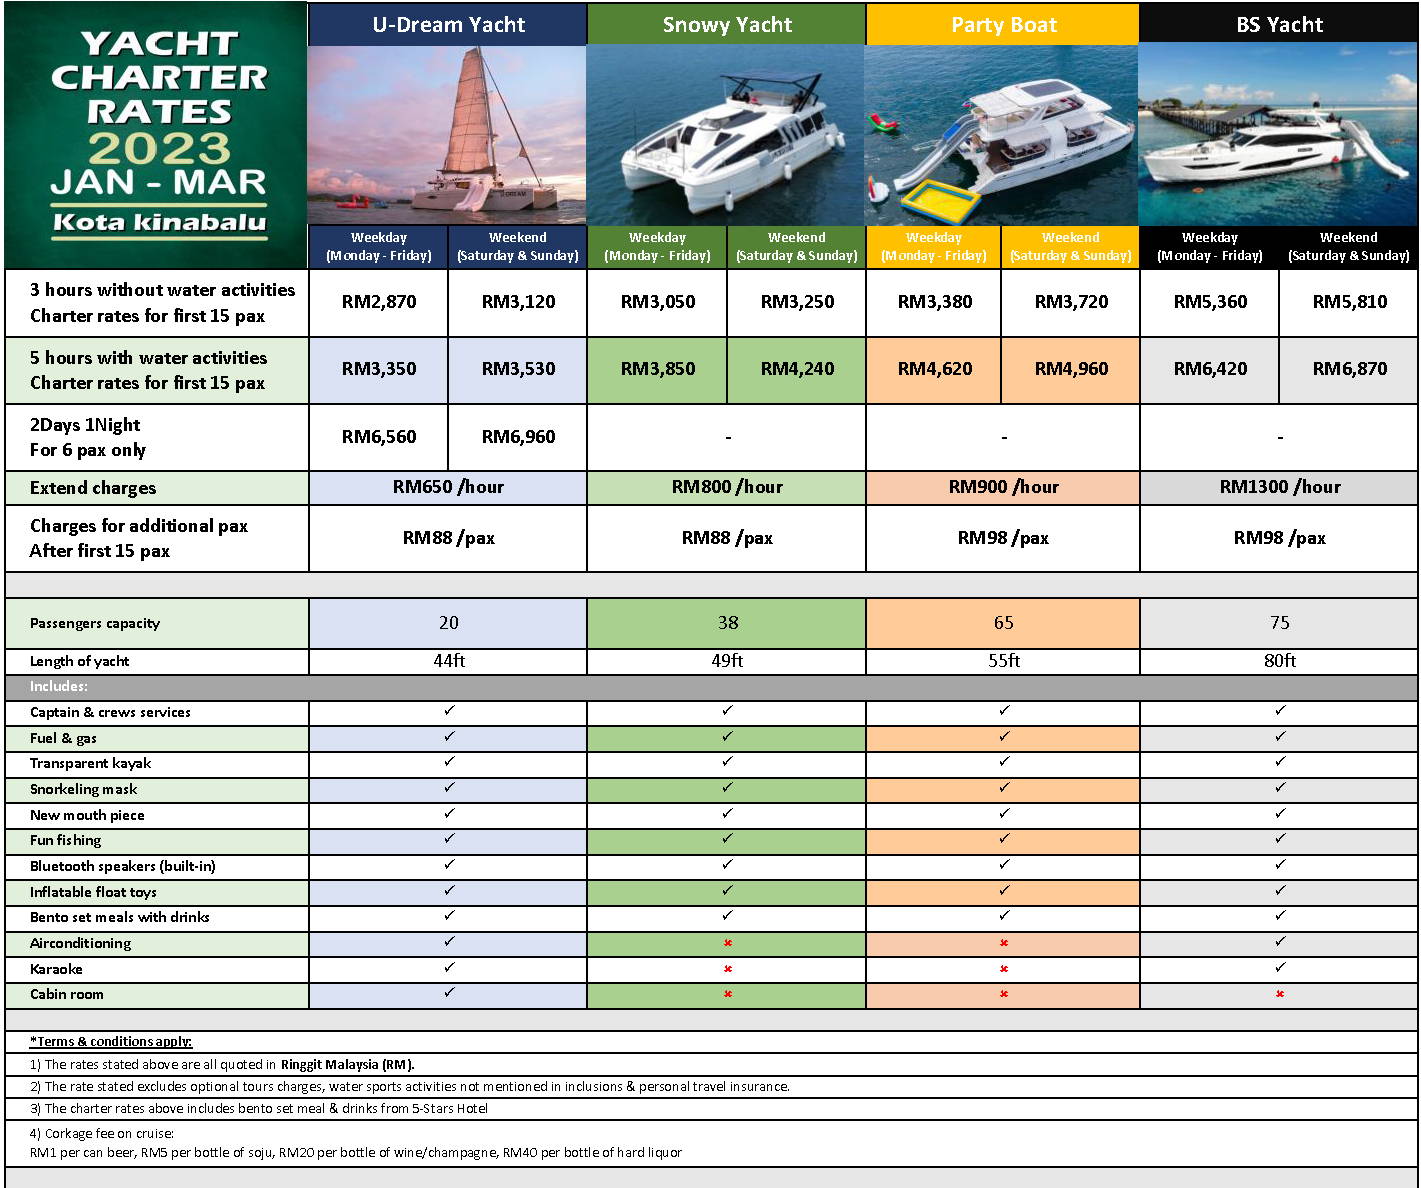 Comparison chart of Udream Yacht Party Boat and Borneo Serenity Bs Yacht